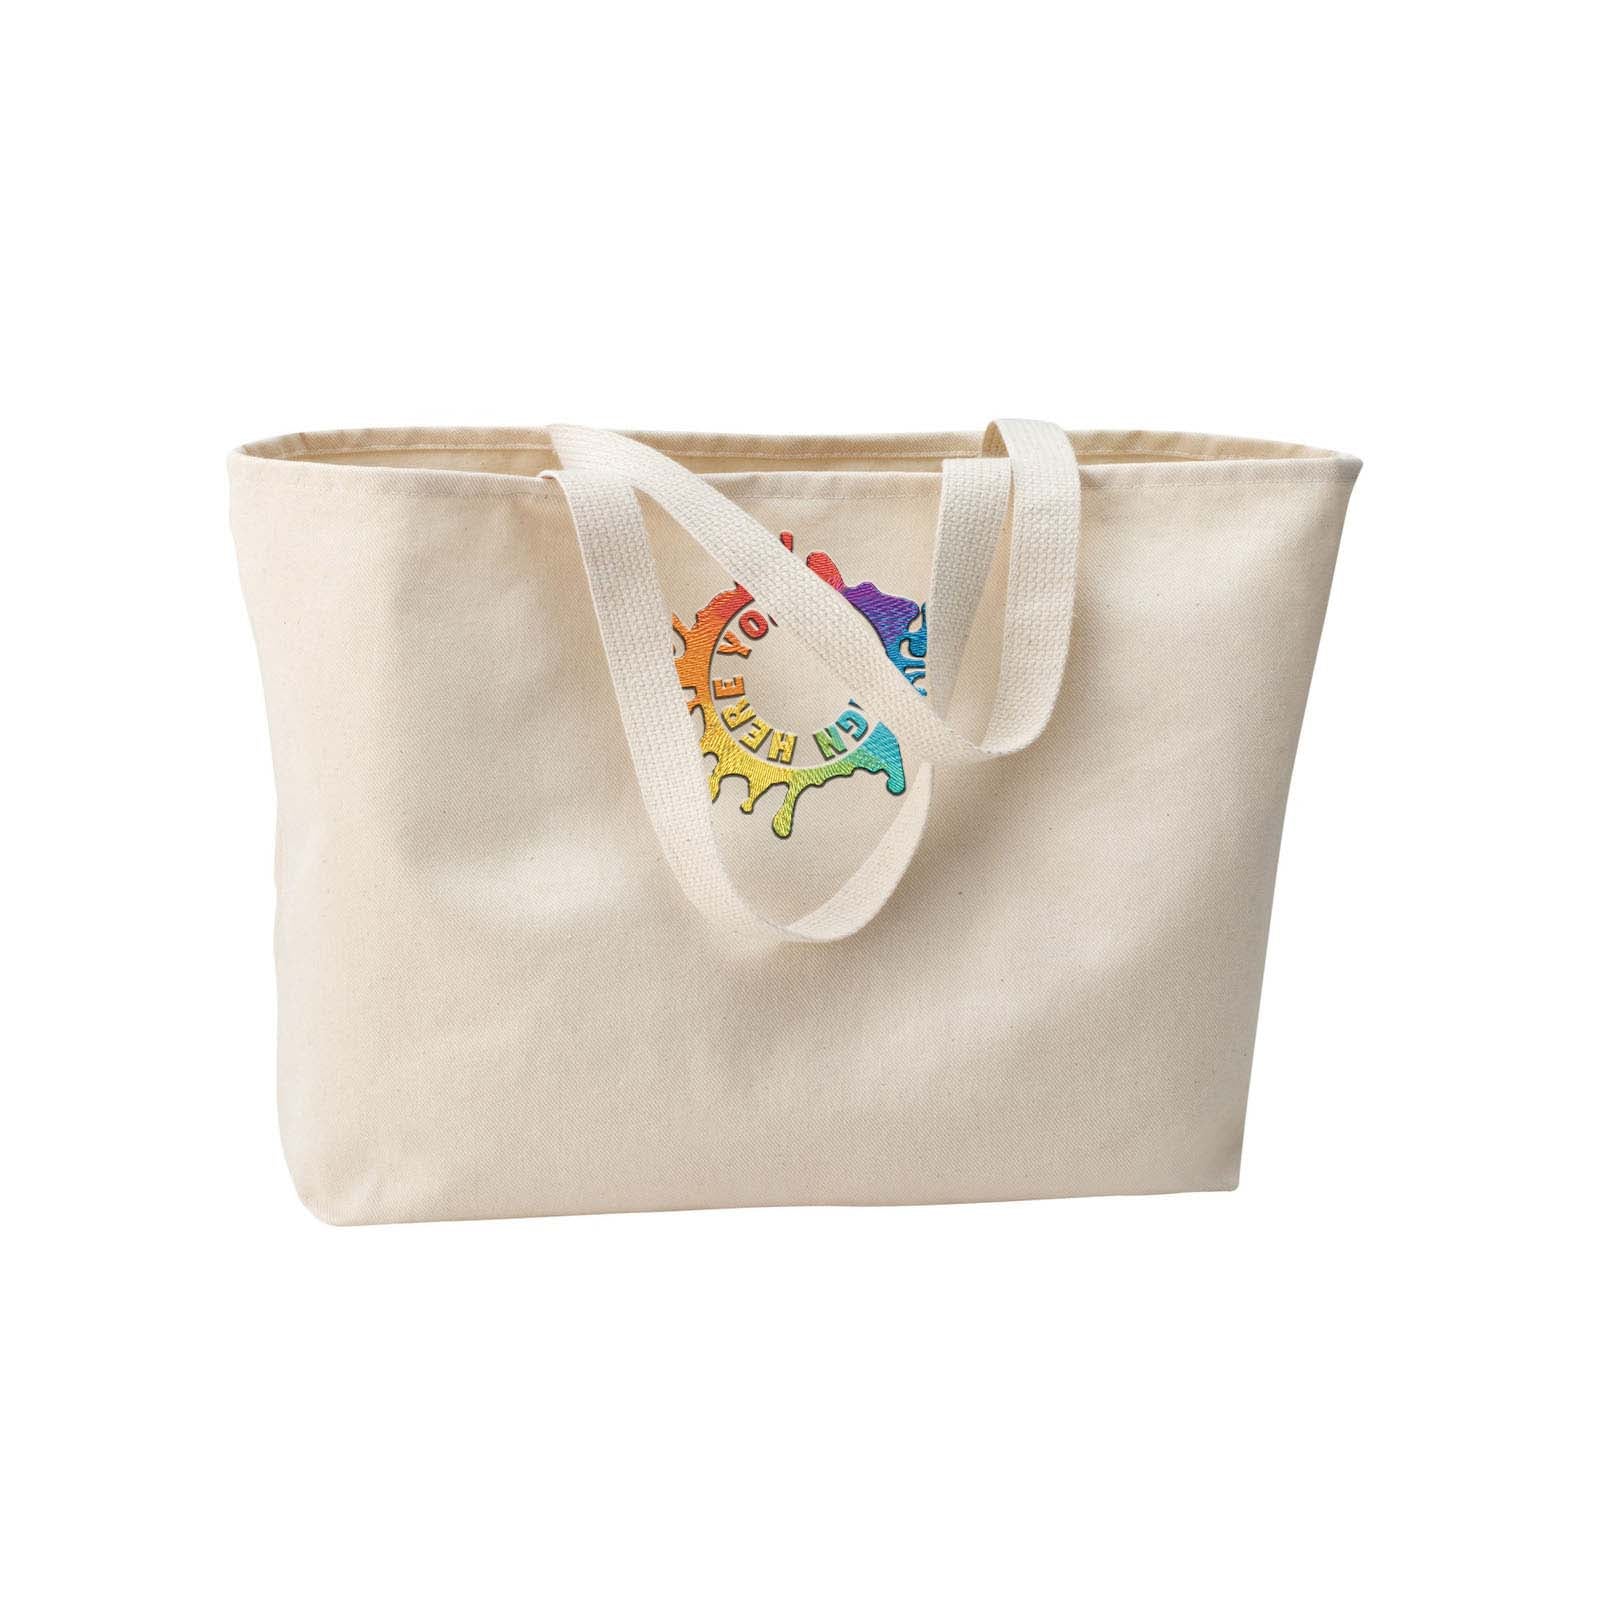 Port Authority® Ideal Twill Jumbo Tote Embroidery - Mato & Hash